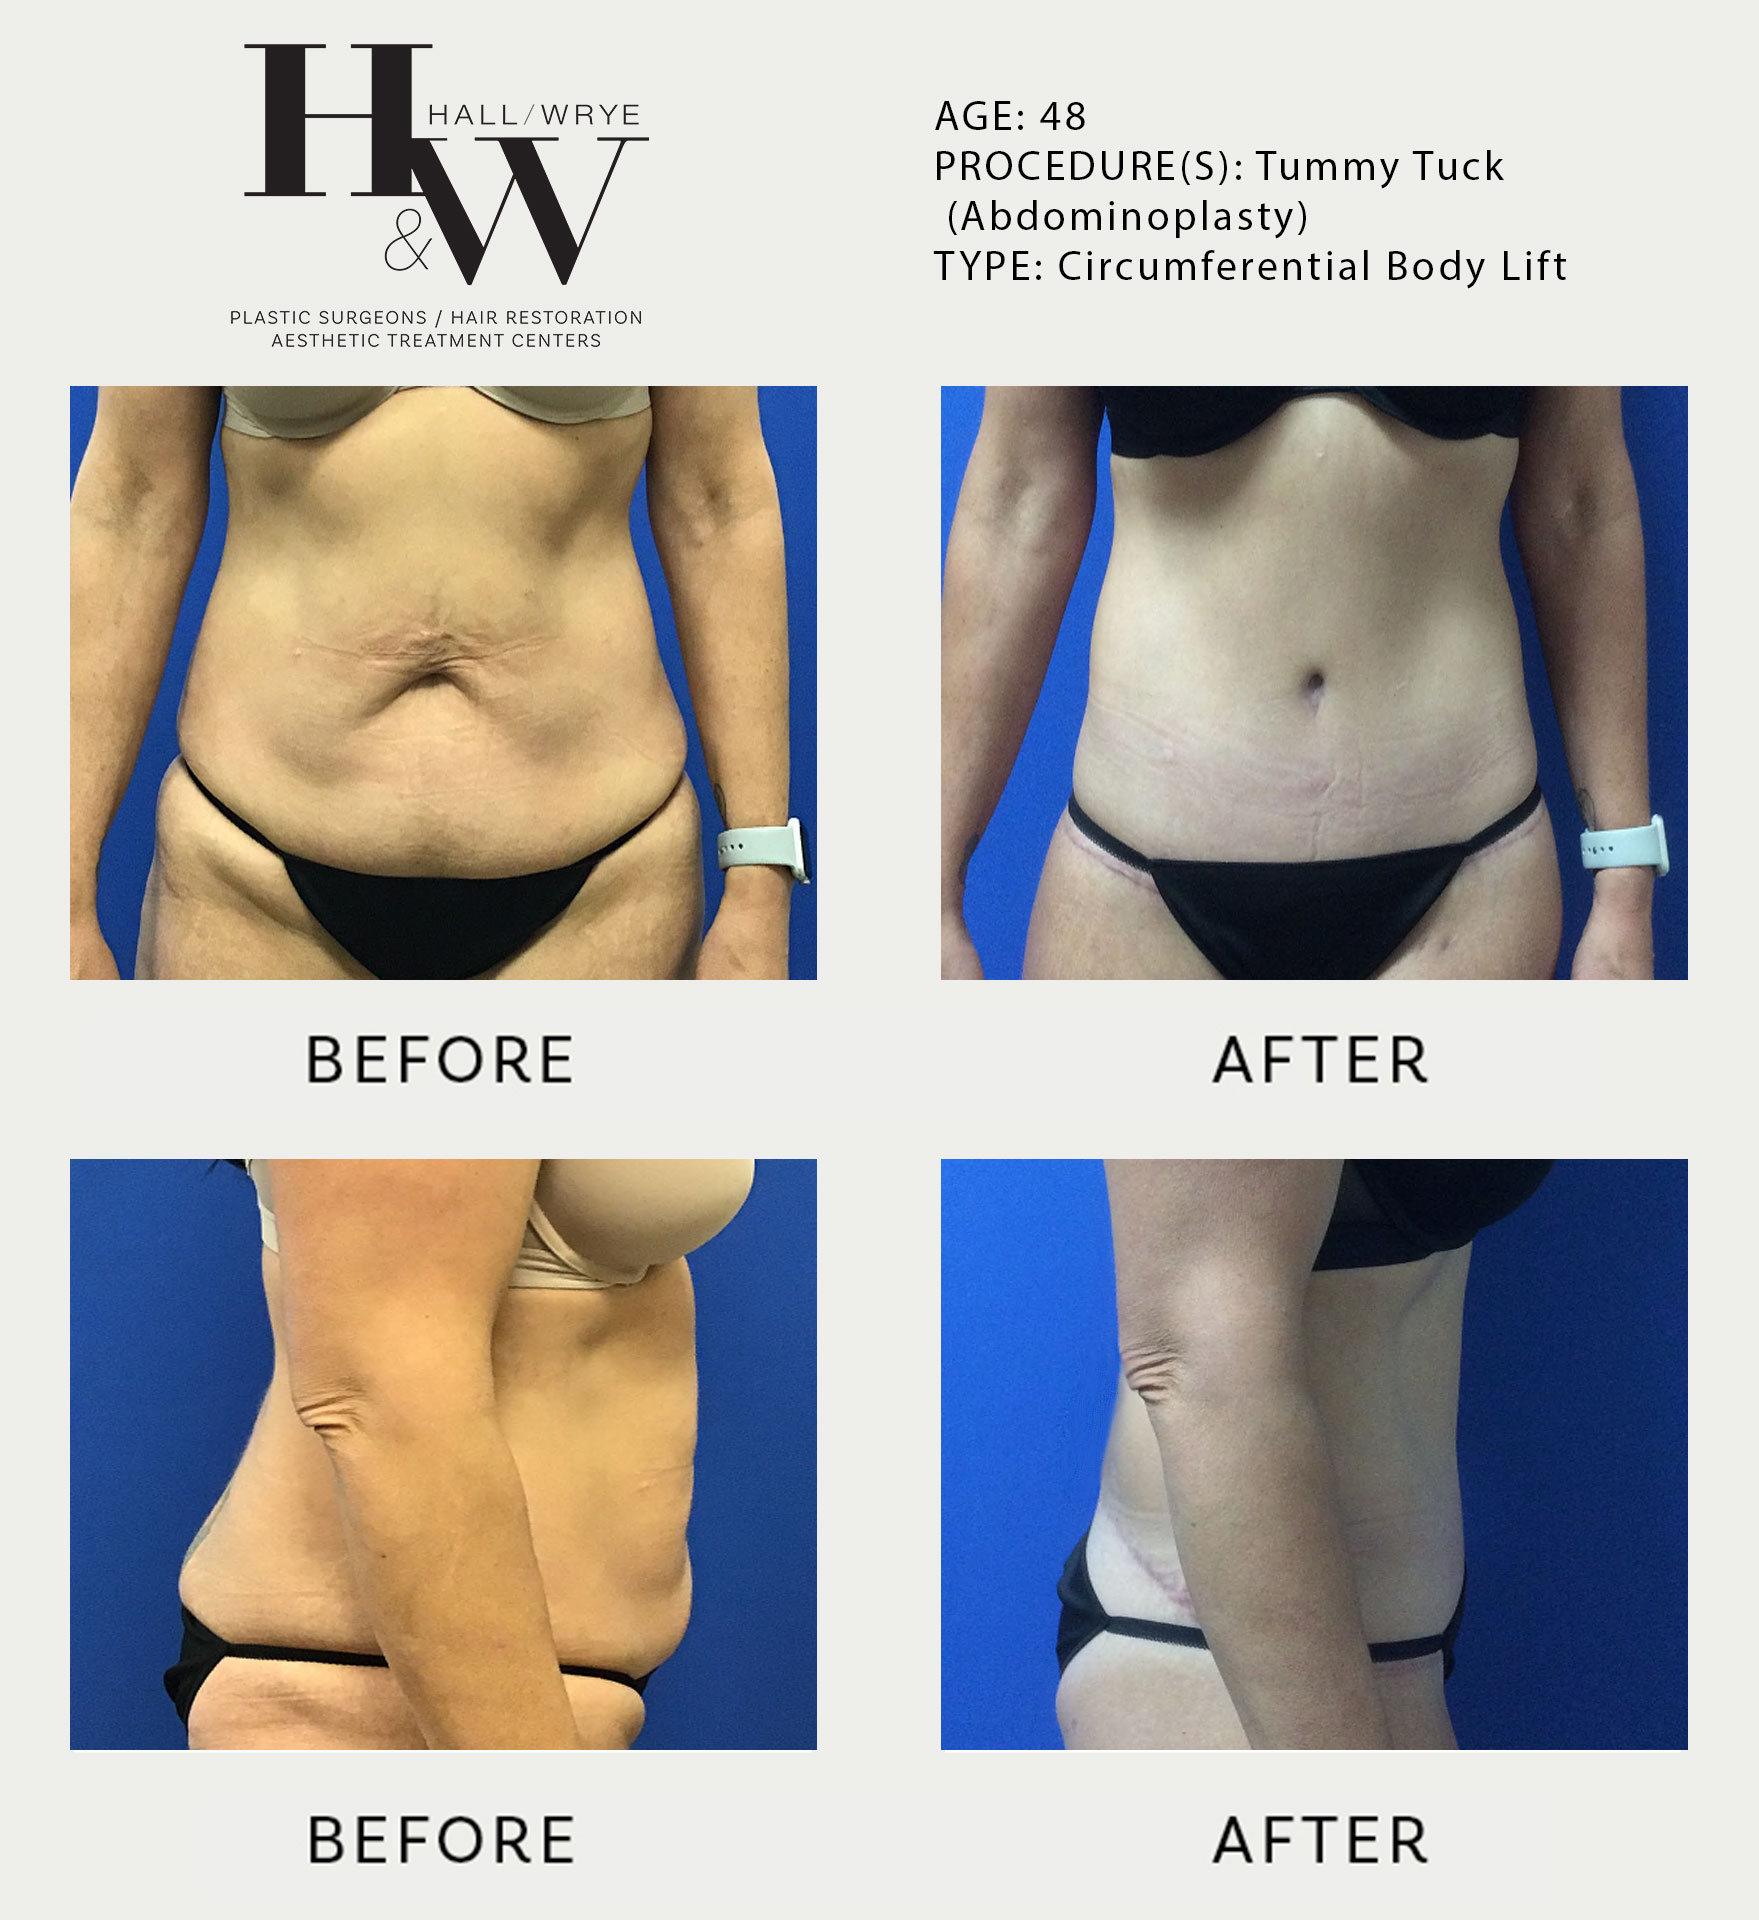 Patient #5745 Tummy Tuck (Abdominoplasty) Small Size Before and